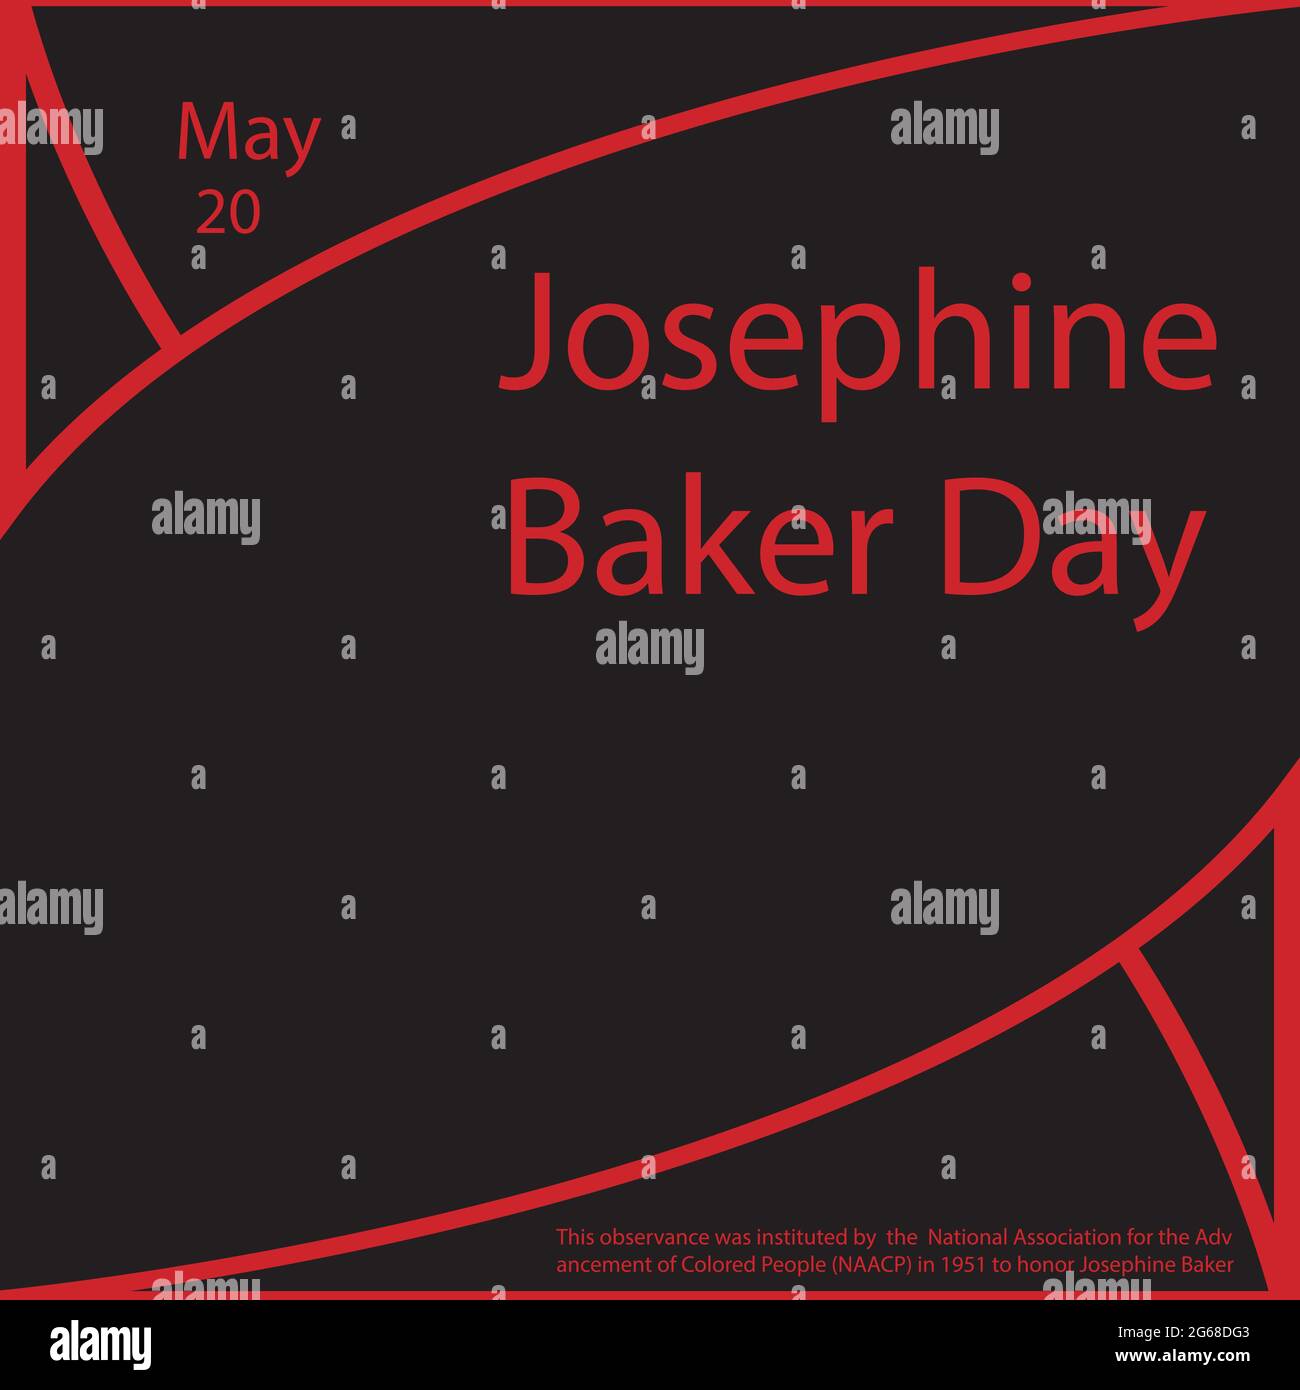 May 20 is Josephine Baker Day. This observance was instituted by the National Association for the Advancement of Colored People (NAACP) in 1951 to hon Stock Vector